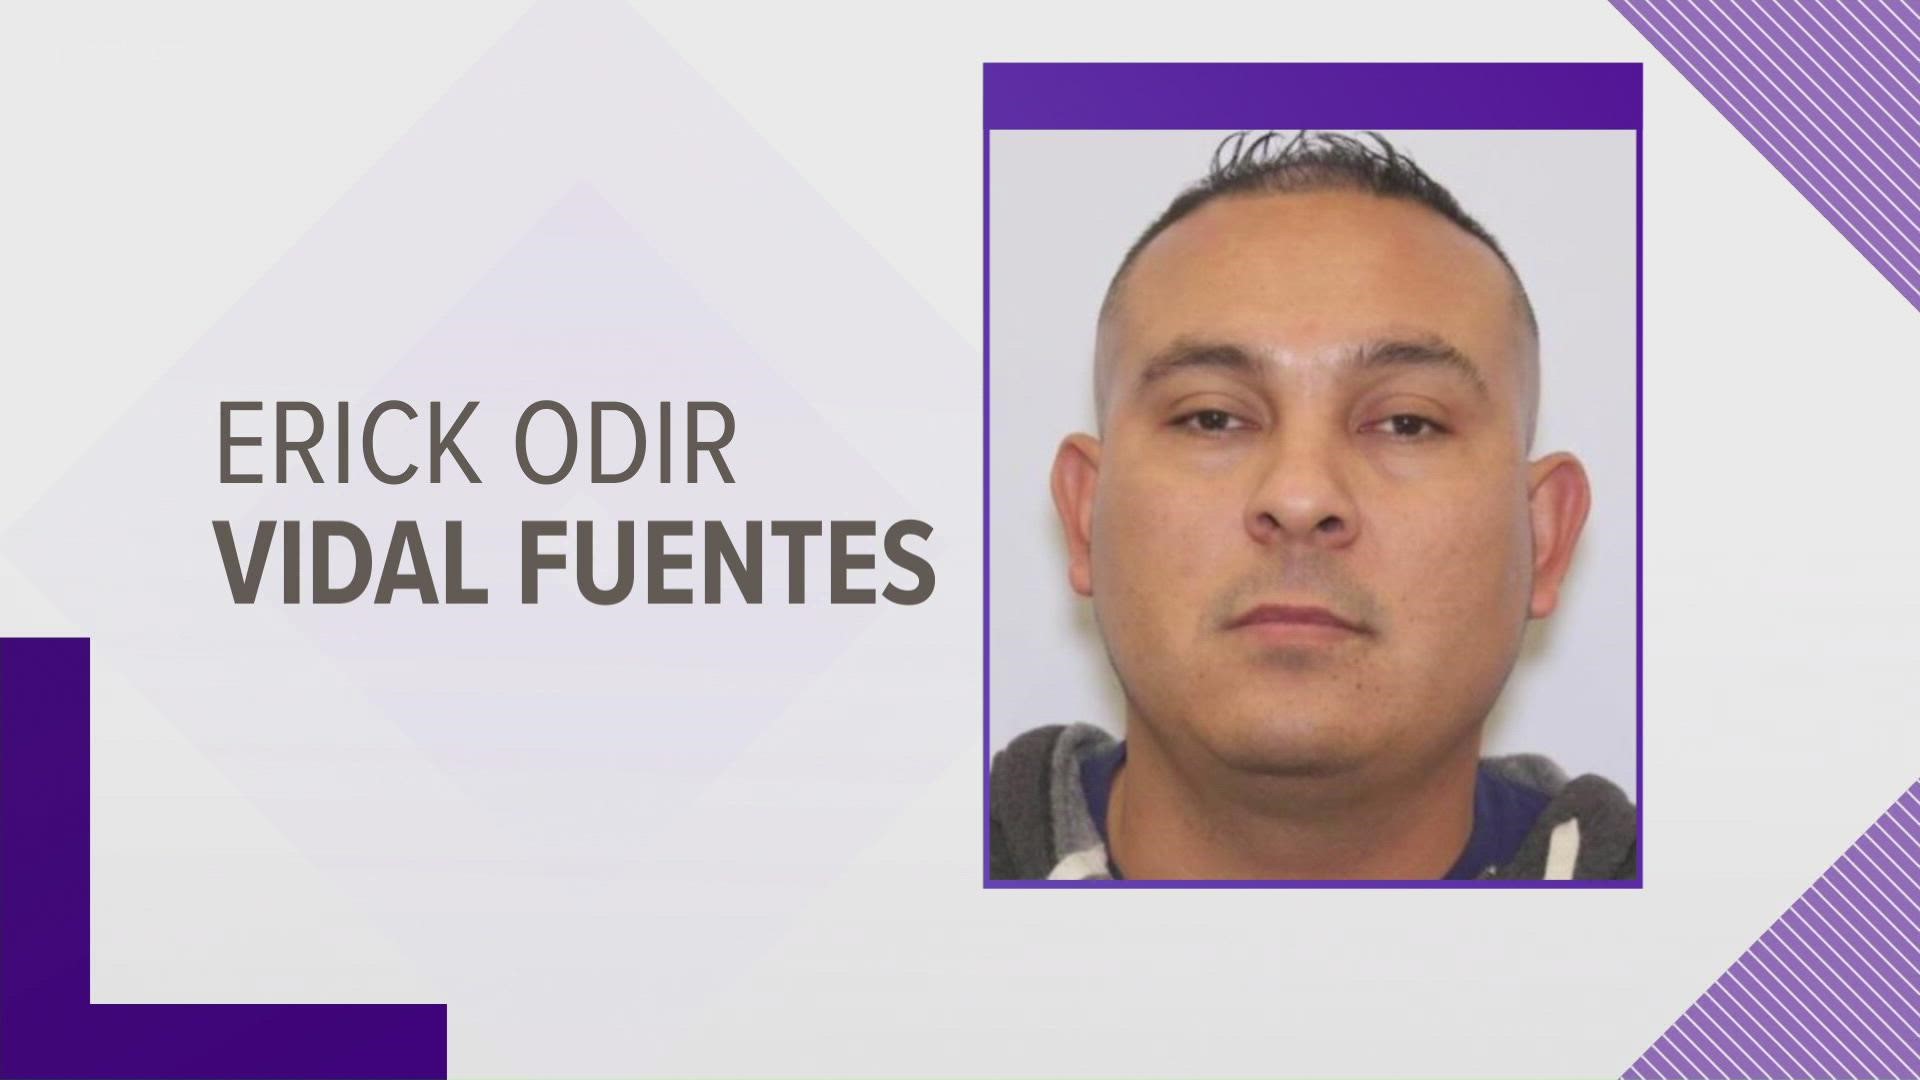 According to Takoma Park Police, 37-year-old Erick Odir Vidal Fuentes of Hyattsville, allegedly sexually assaulted two female members of the church.